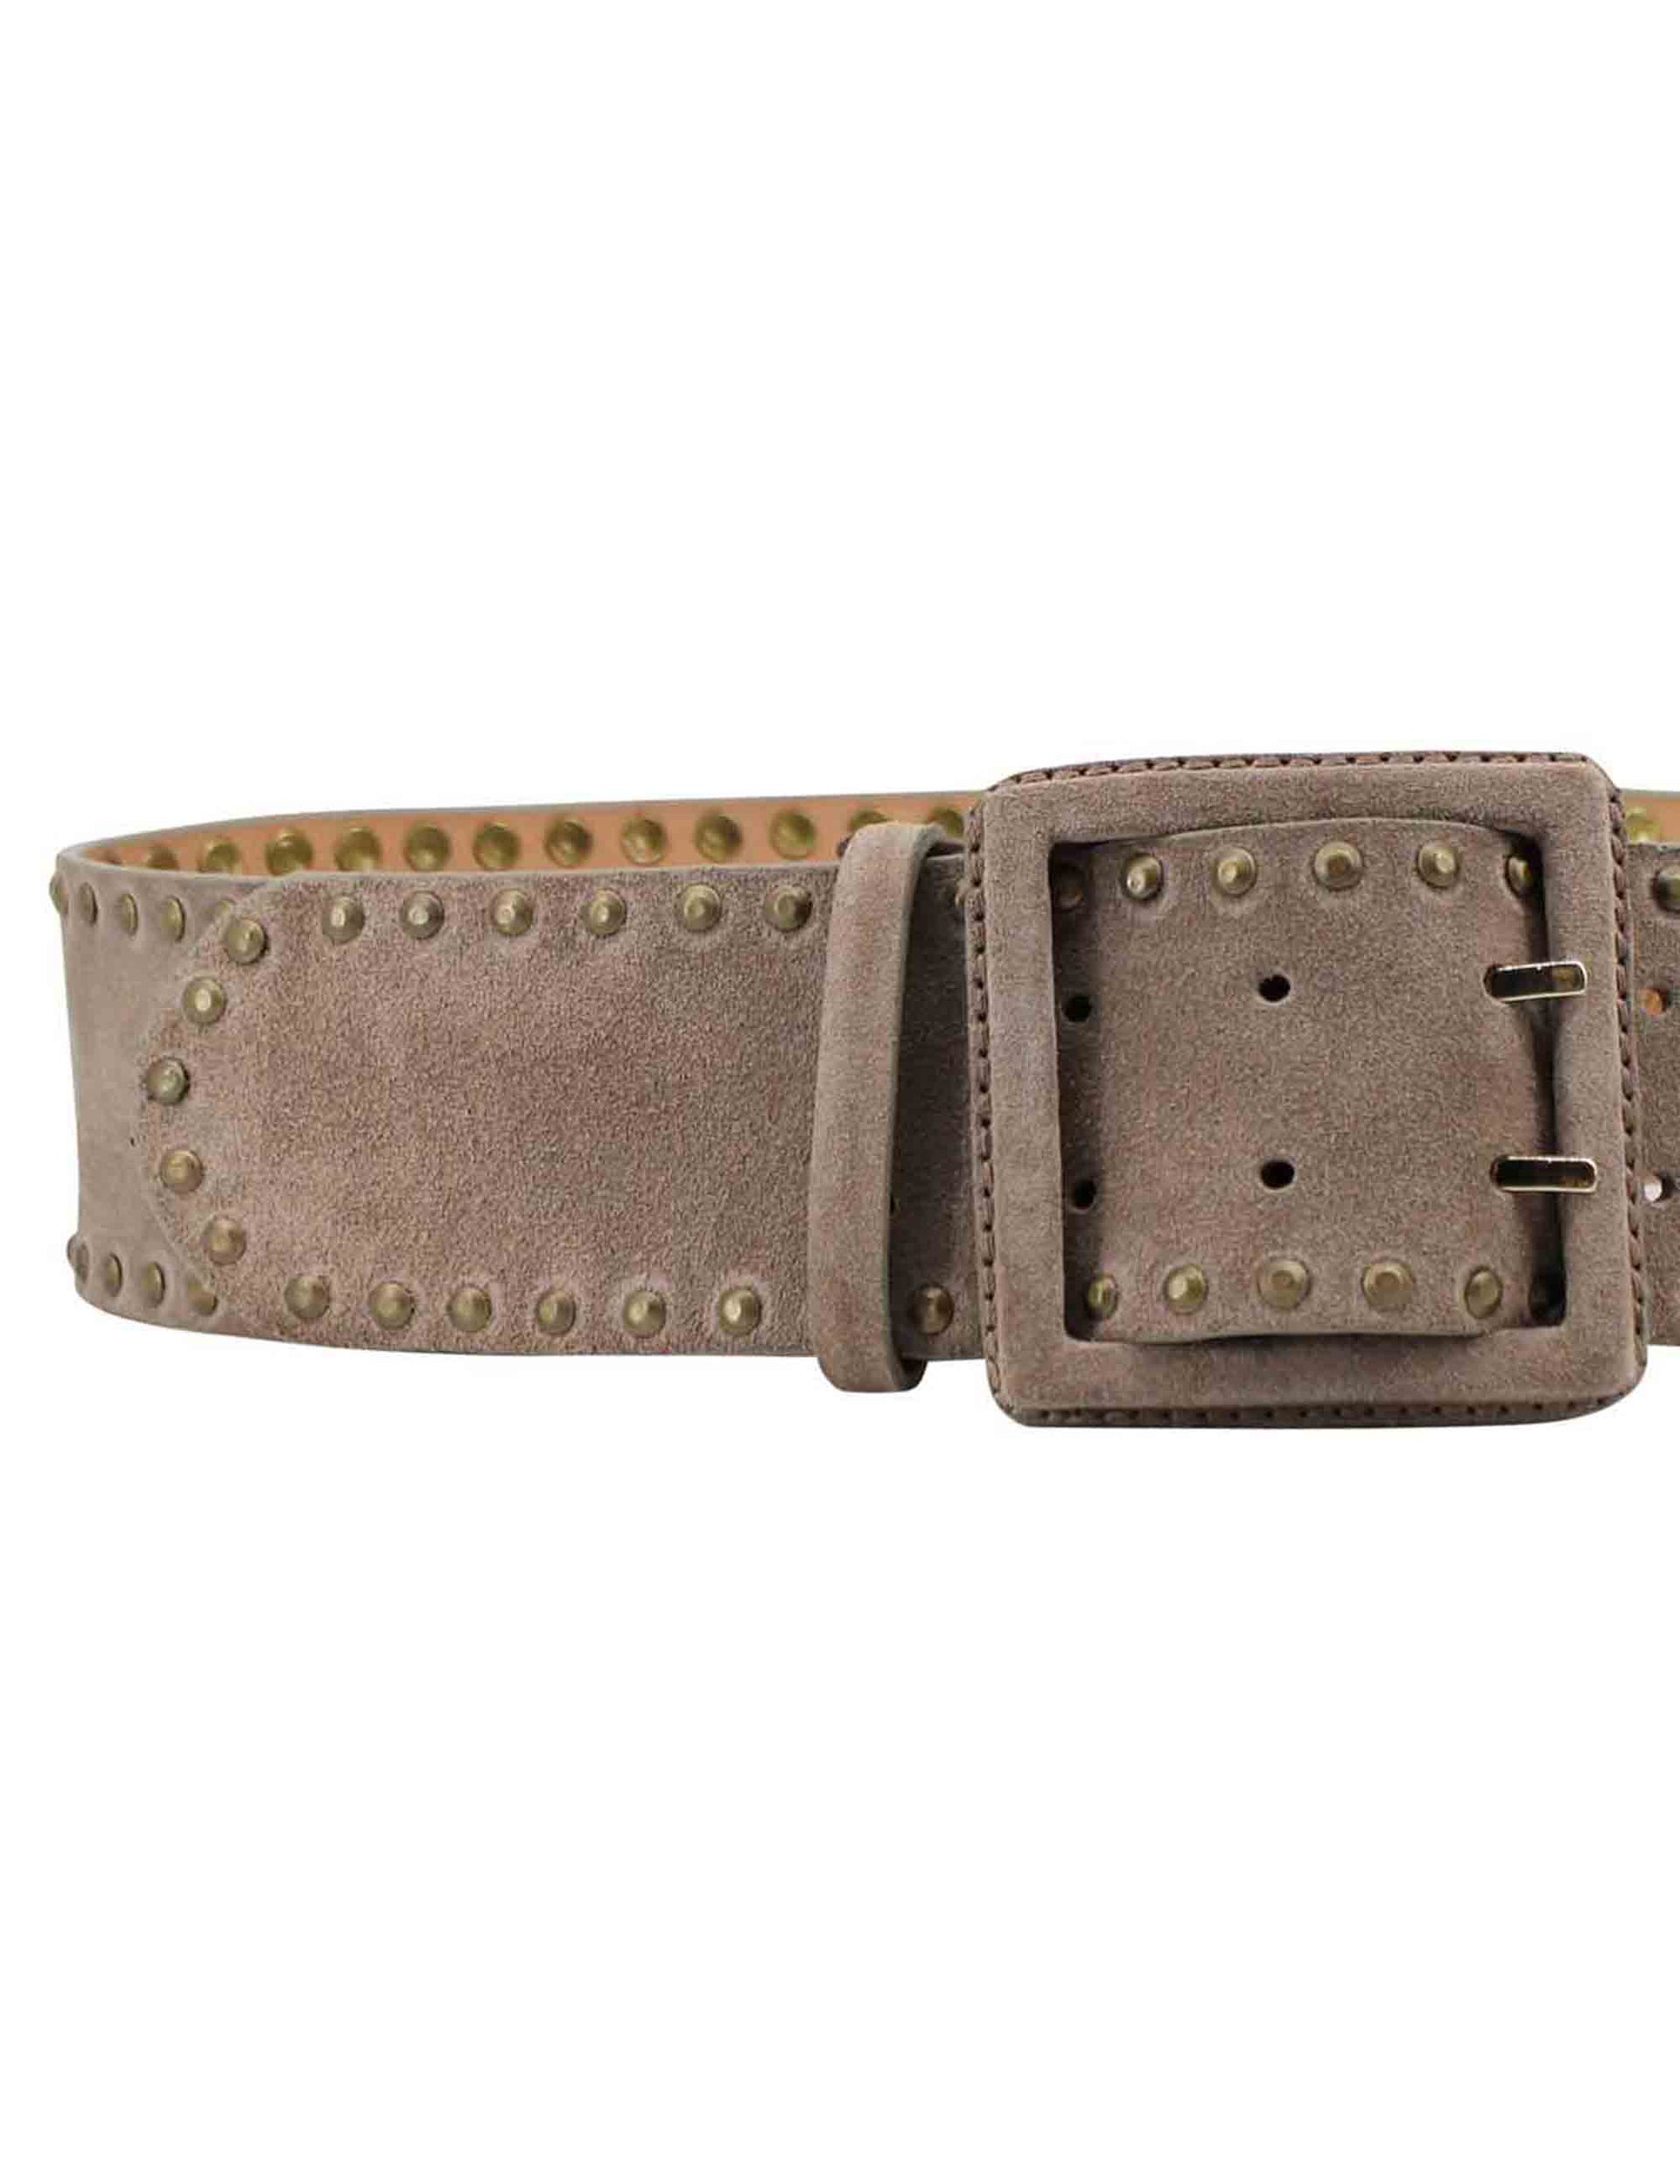 Women's belts in taupe suede with studs